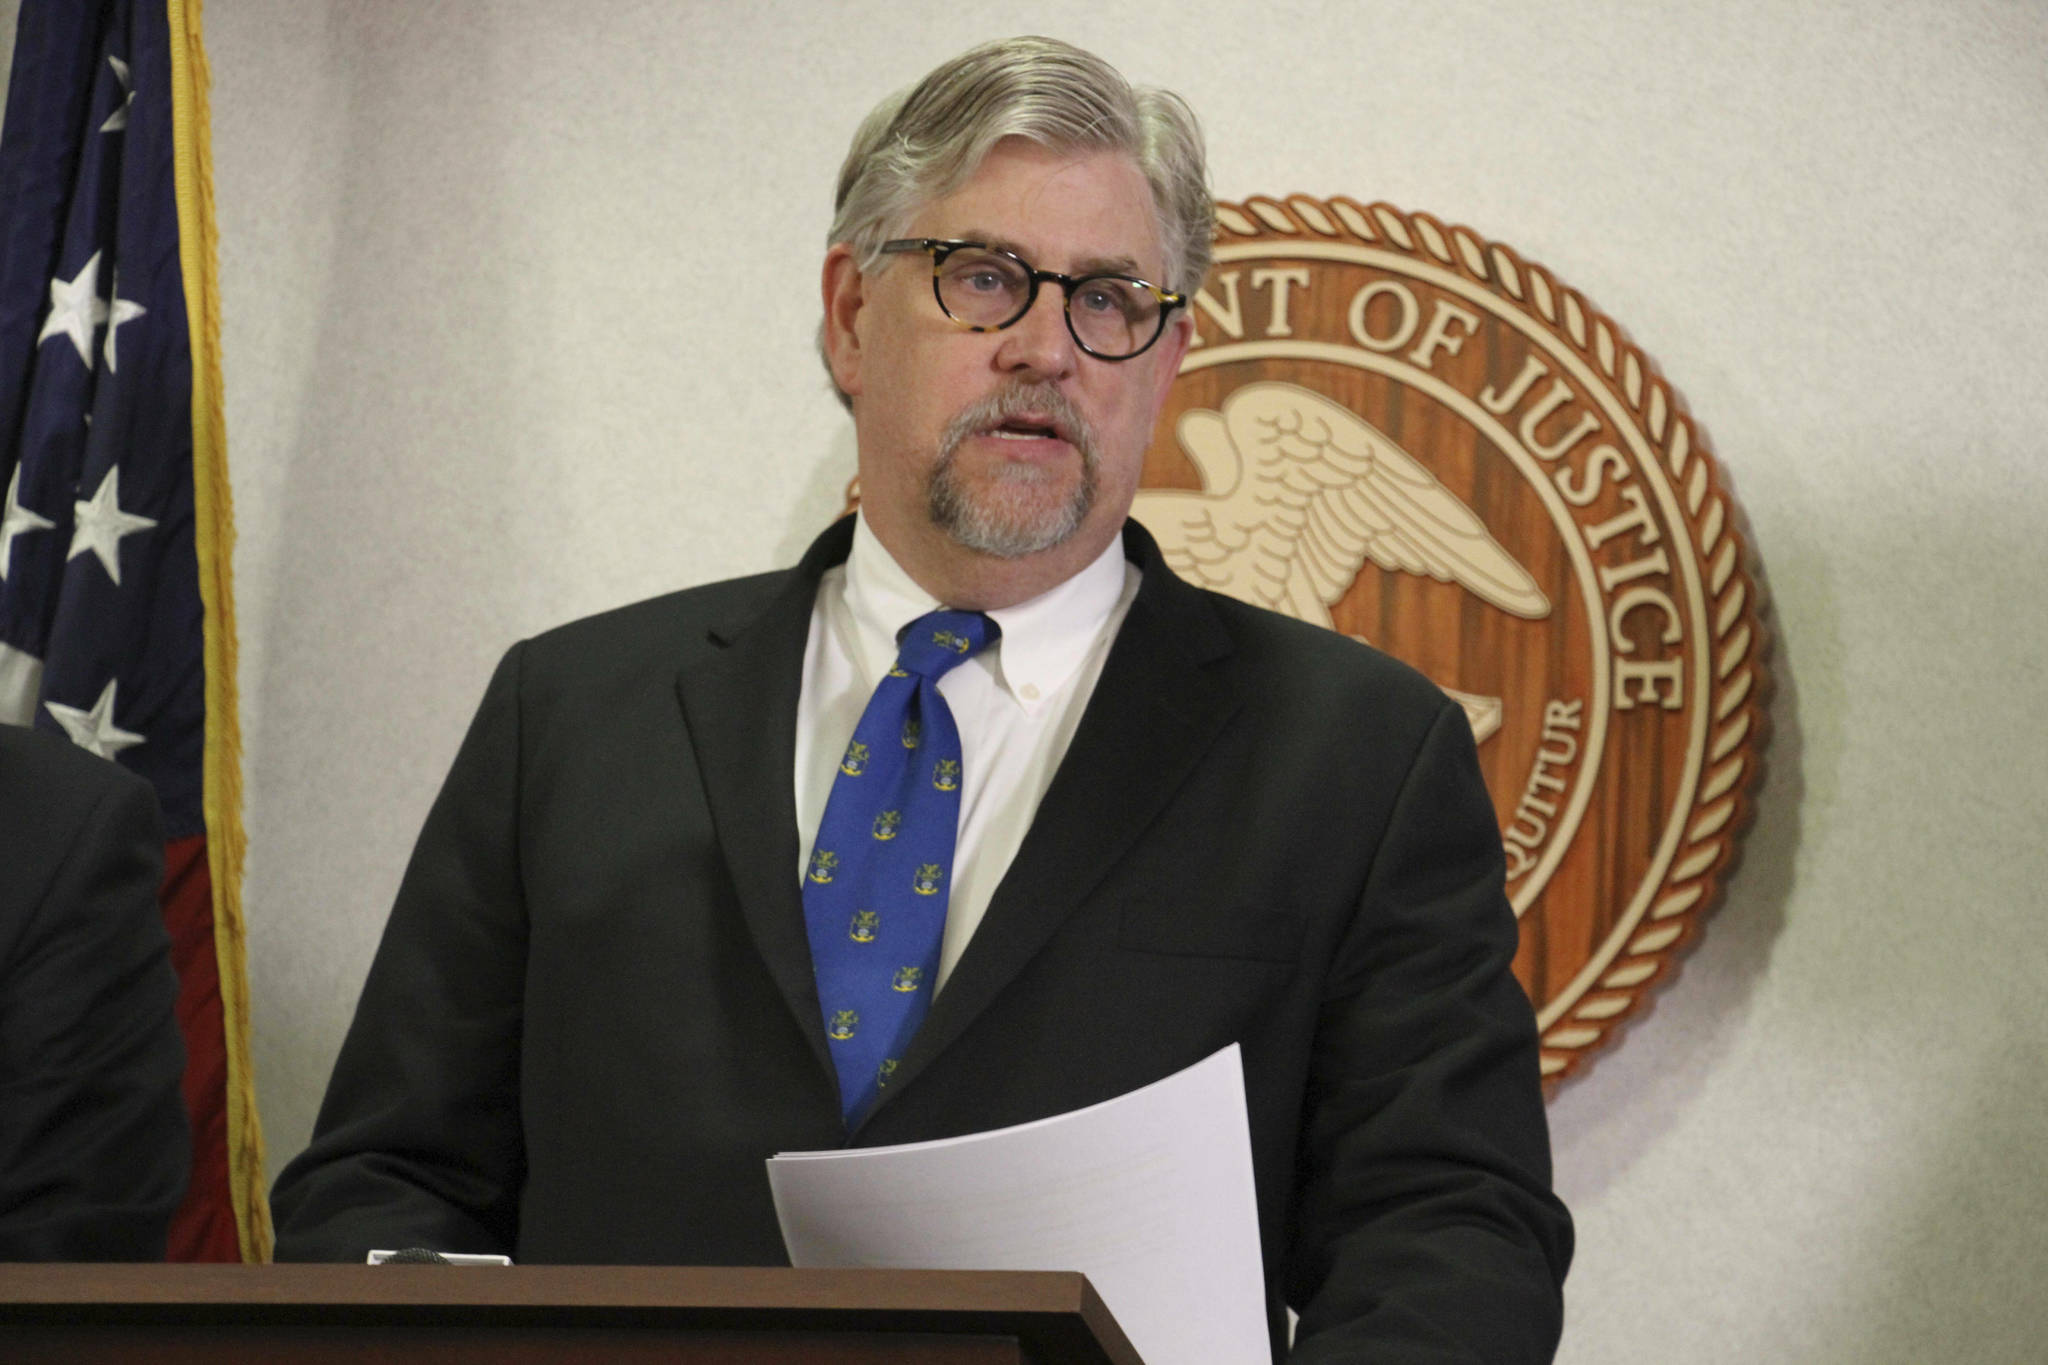 Bryan Schroder, Alaska’s U.S. Attorney announces that several members of a white supremacist gang operating in Alaska prisons or shipped to facilities in Colorado and Arizona, have been charged in a racketing enterprise in Anchorage, Alaska, Wednesday, March 27, 2019. Members who sport Nazi tattoos face racketeering charges including murder, kidnapping, assault, and distribution of narcotics and firearms. (AP Photo/Mark Thiessen)